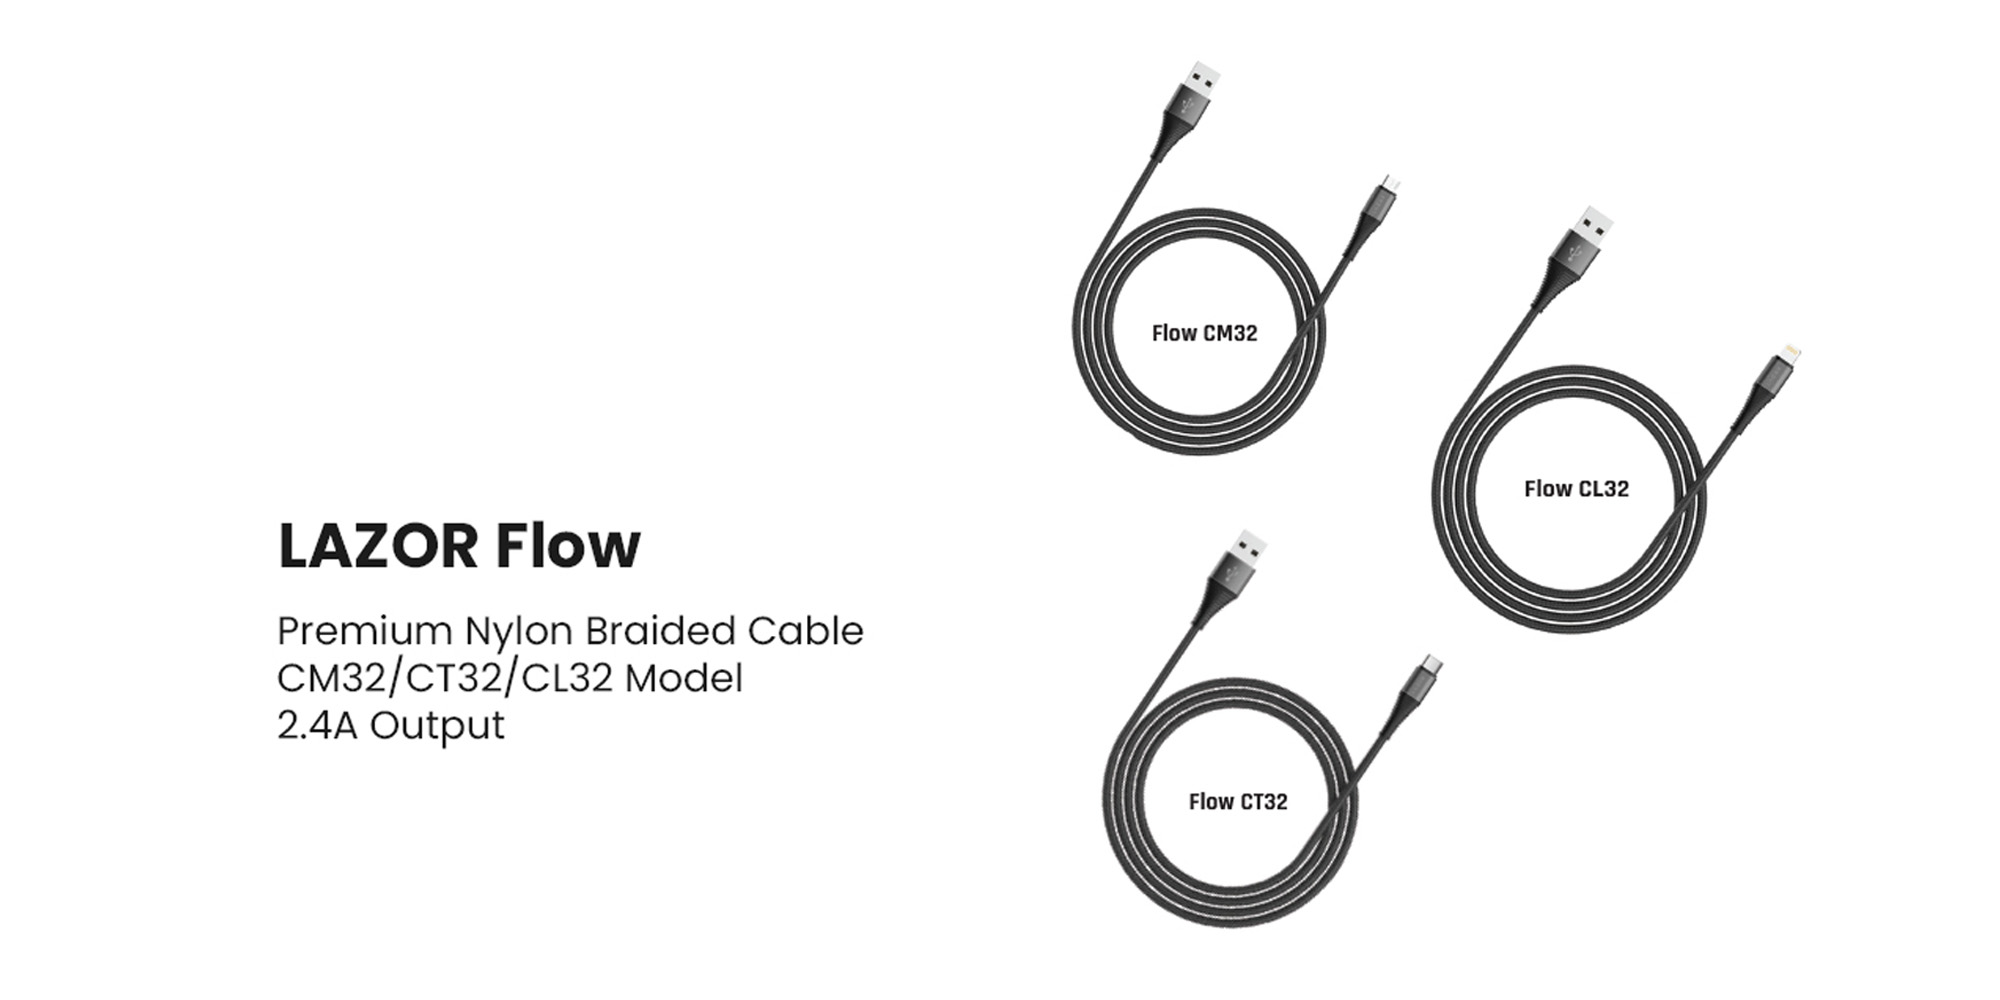 LAZOR Flow CM32: USB-A to Micro-USB Fast Charging Cable, Premium 1 Meter, 2.4A Fast Sync and Charge Cable - Black